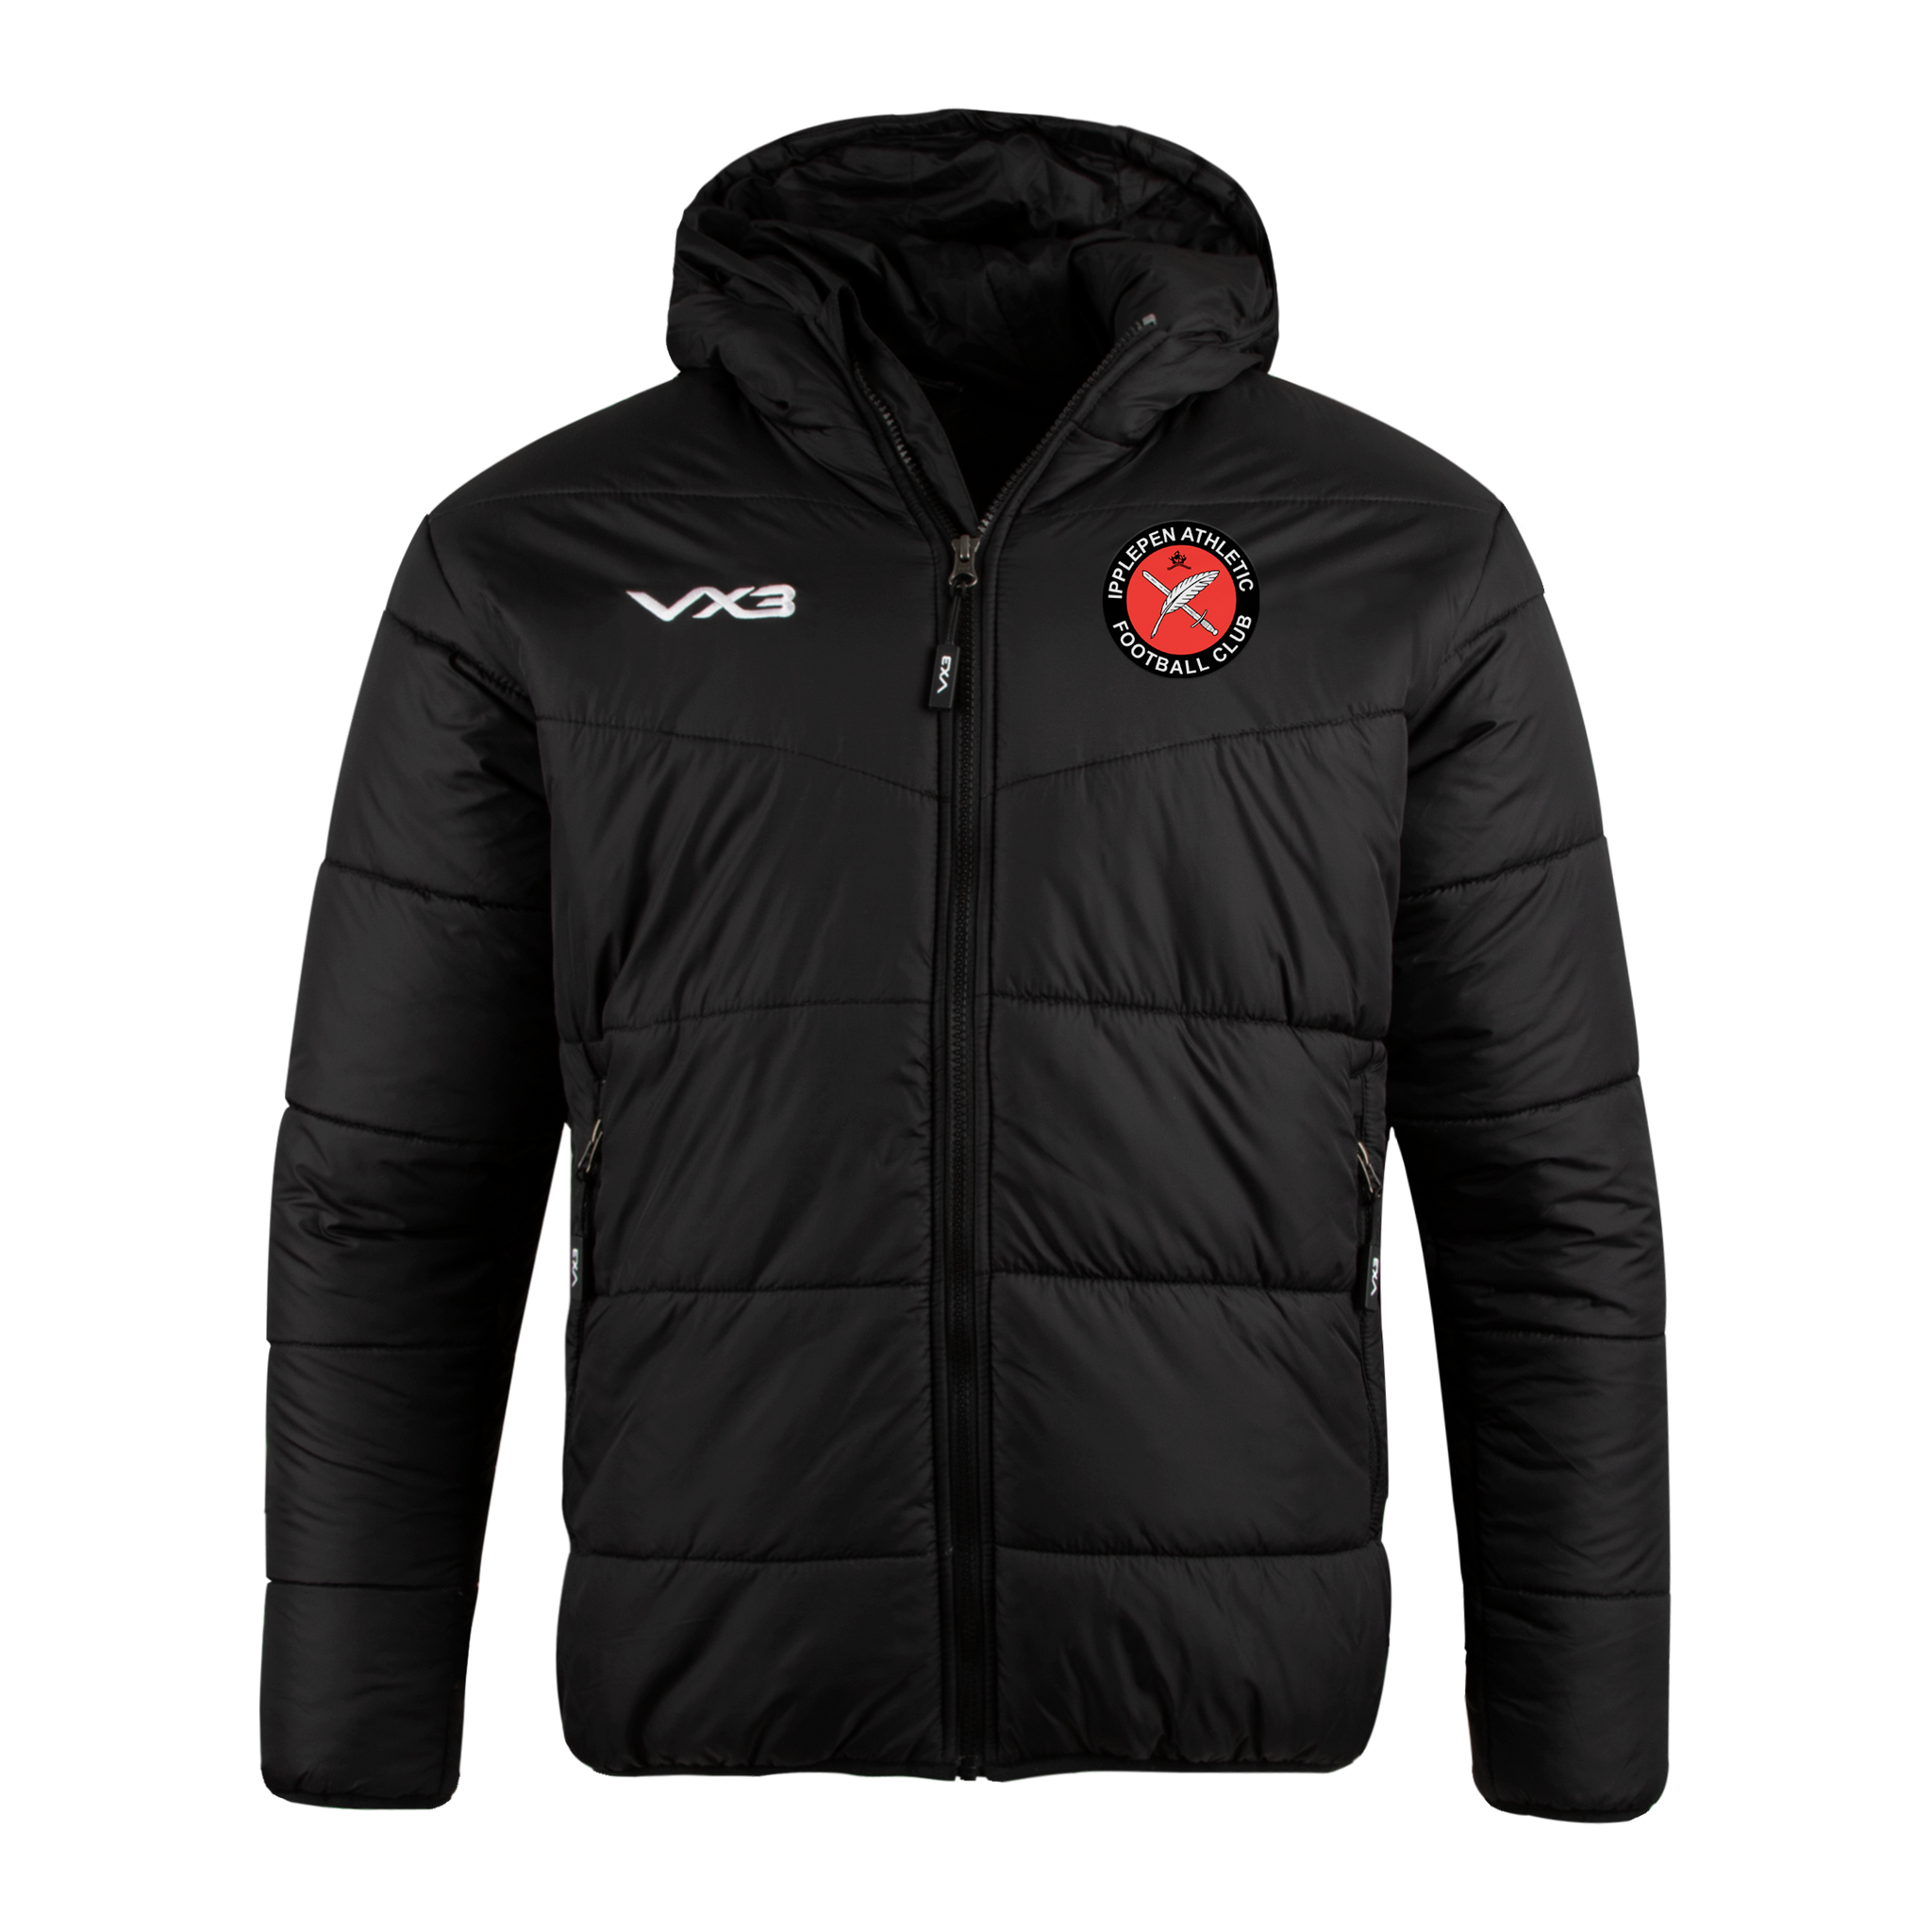 Ipplepen Athletic Football Club Lorica Quilted Jacket